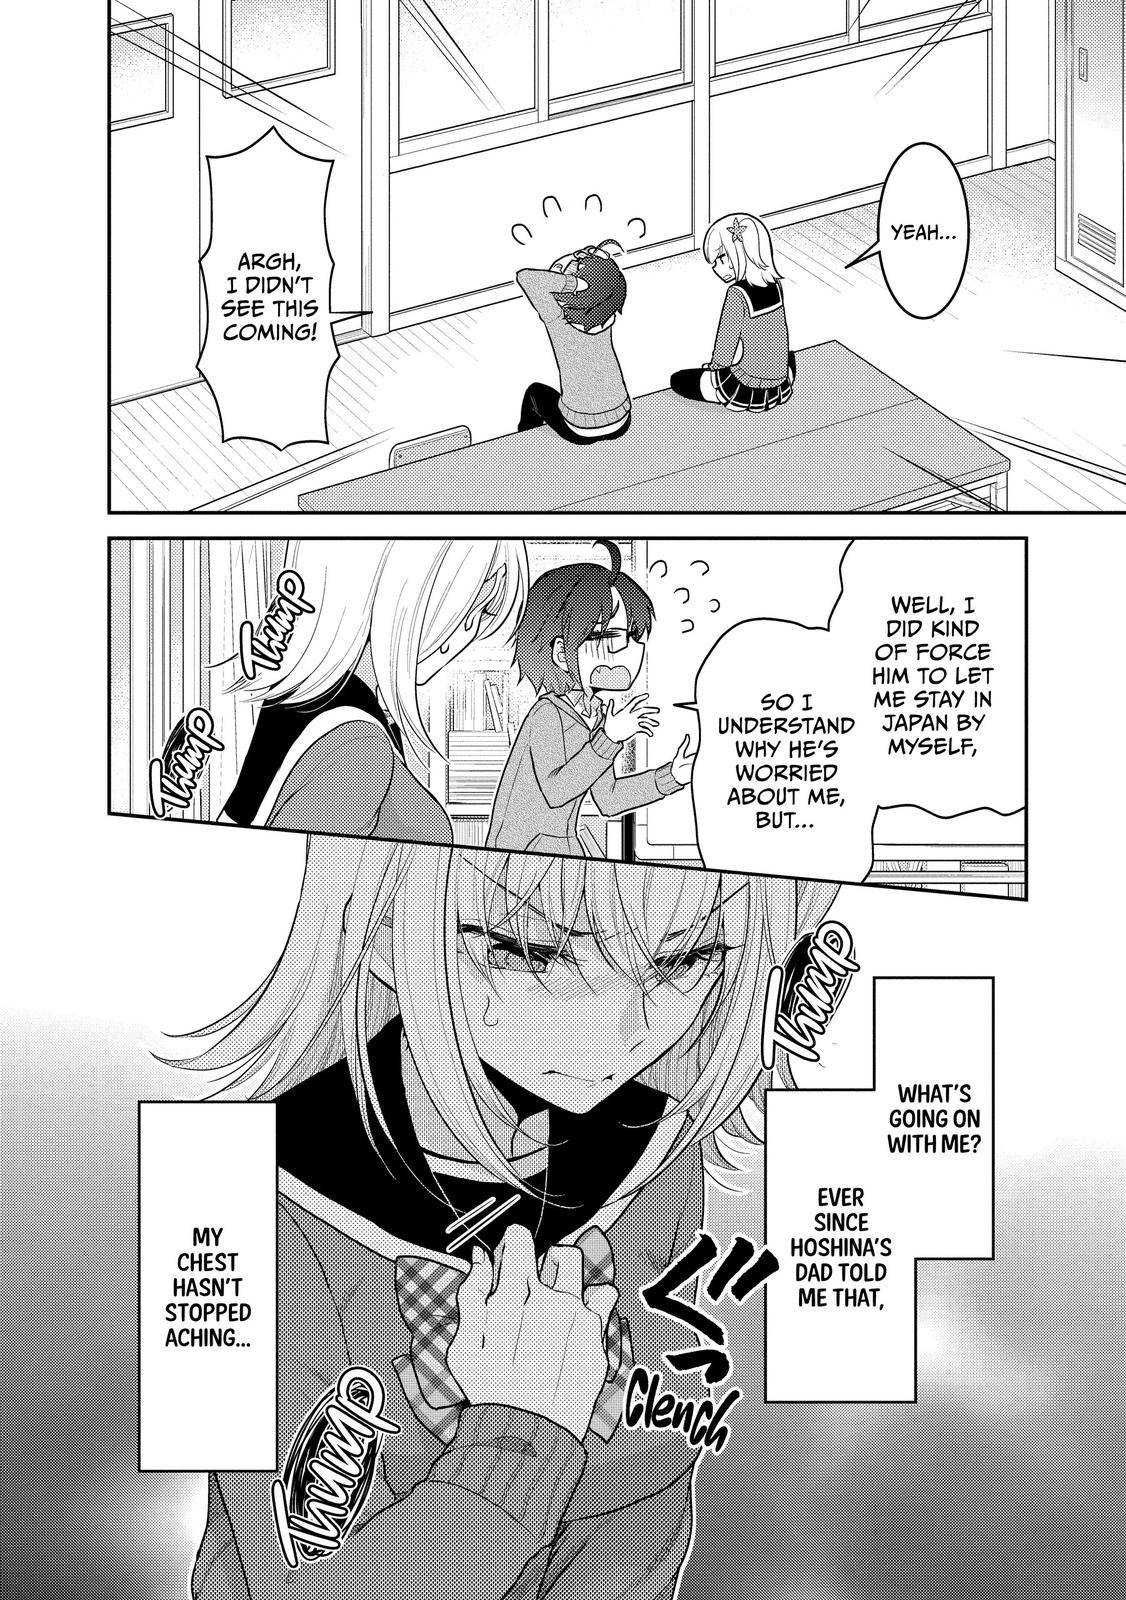 I Love Yuri and I Got Bodyswapped with a Fujoshi! - chapter 19 - #2